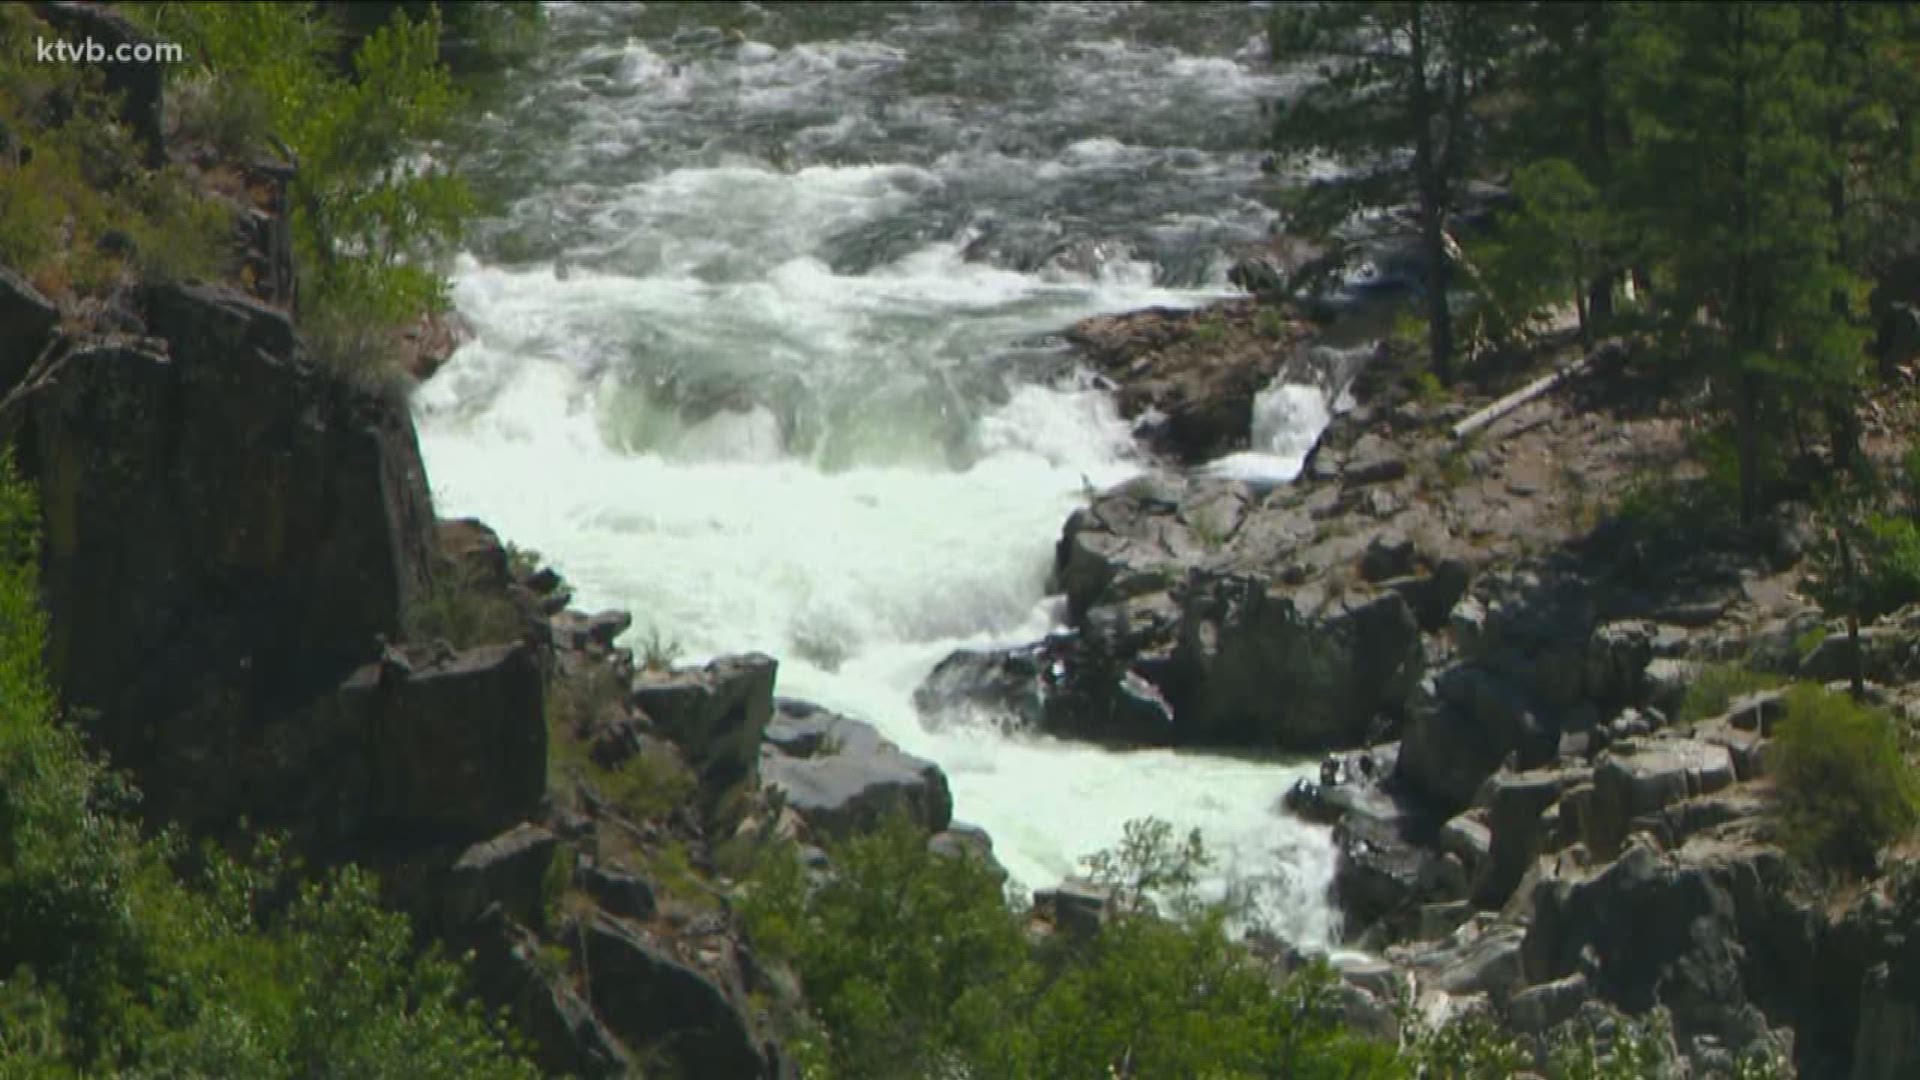 Two people lost their lives in two separate incidents on the river in the past week.